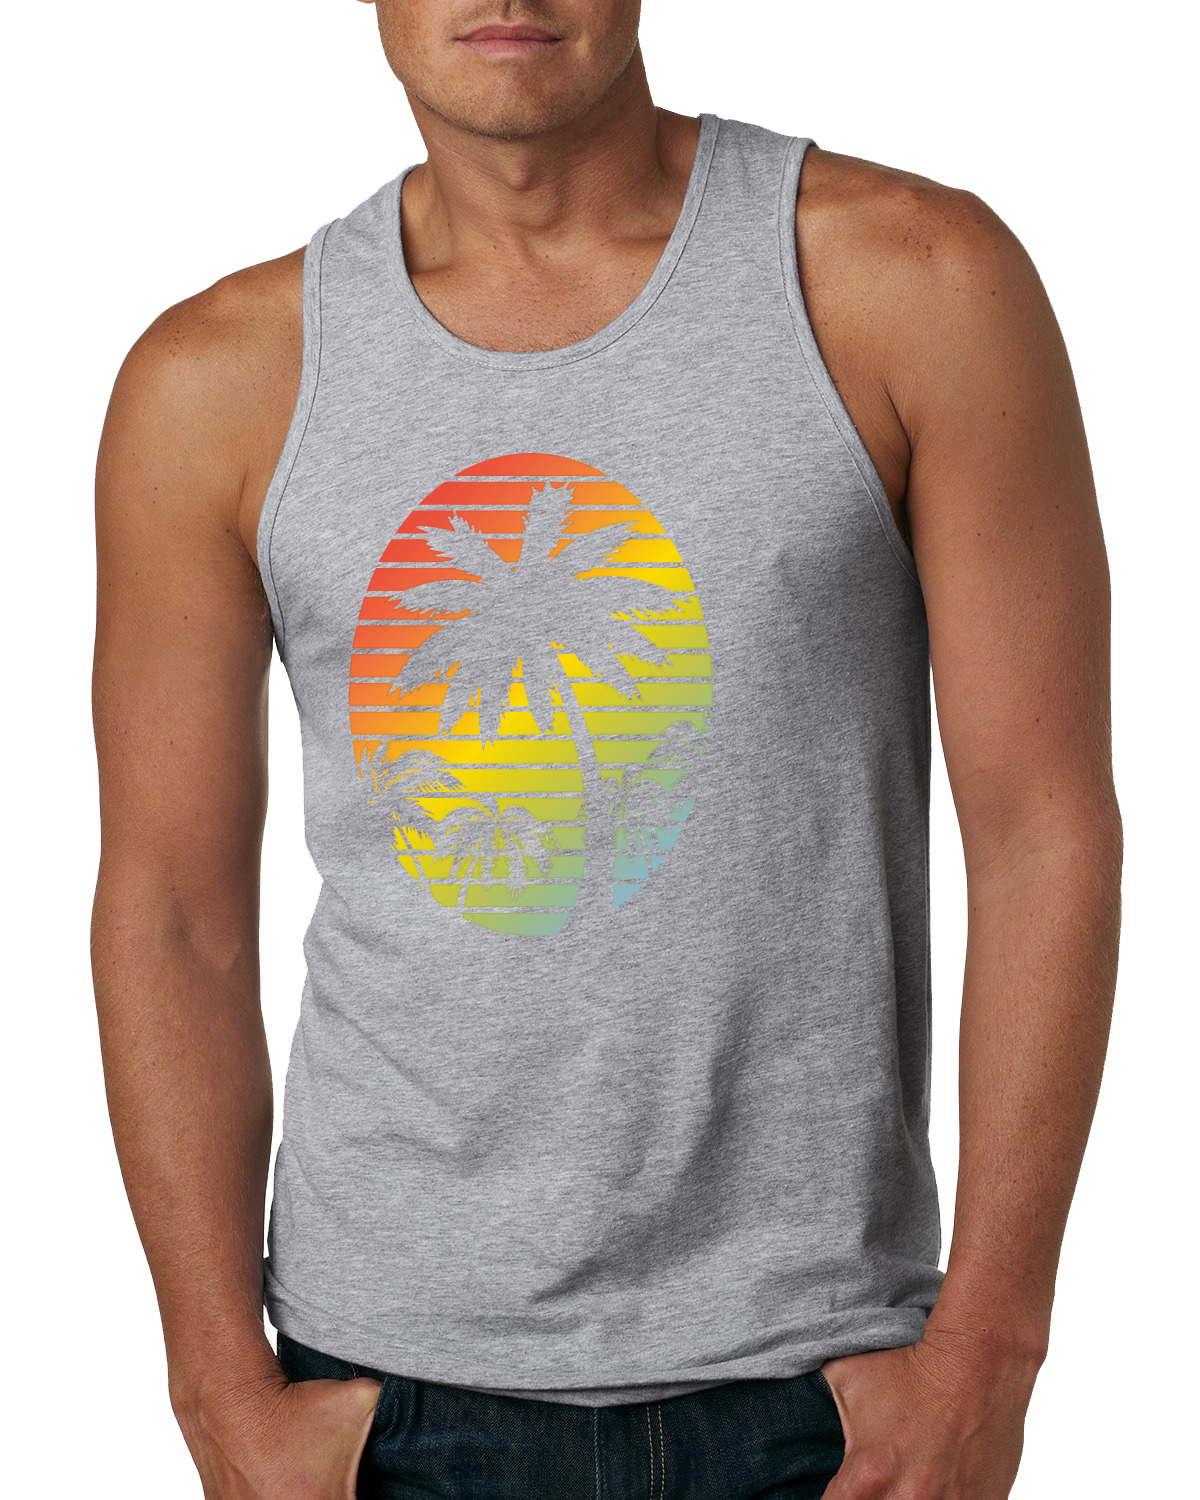 Tropical Palm Trees Silhouettes with Sunset | Mens Pop Culture Graphic Tank Top, Heather Grey, X-Large - image 1 of 4